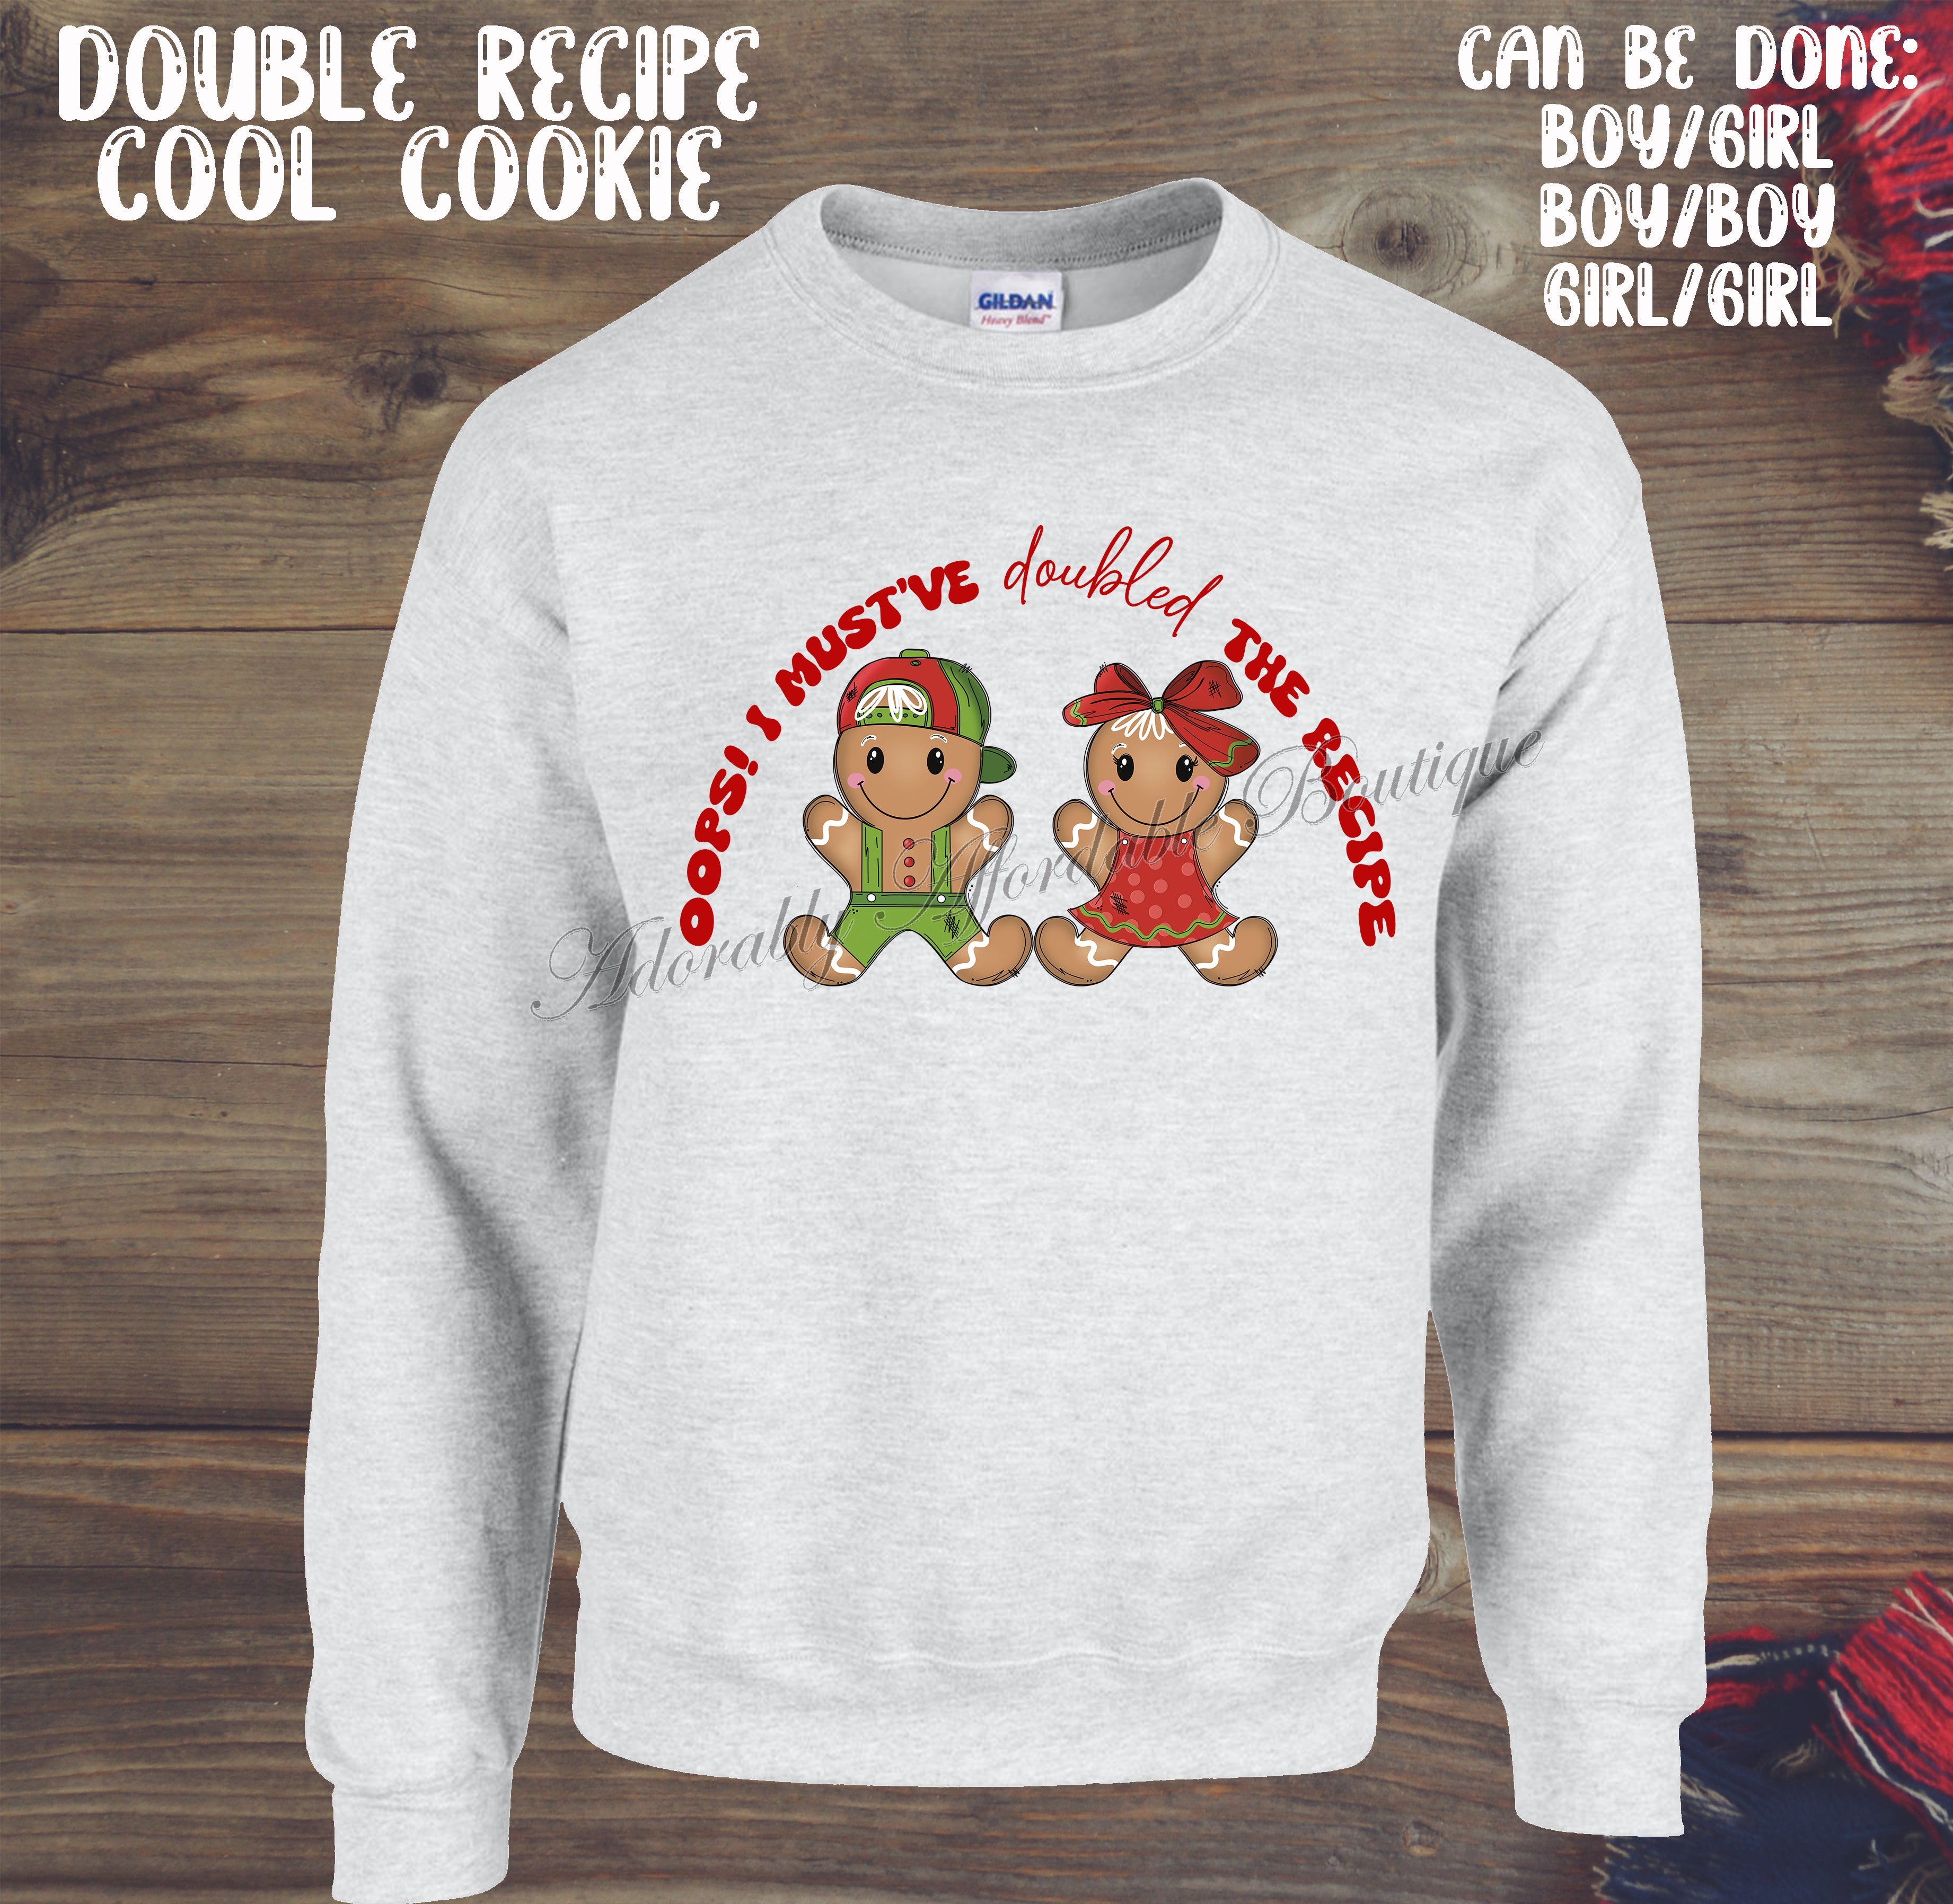 Double Recipe Cool Cookie Long Sleeve Shirt round 2